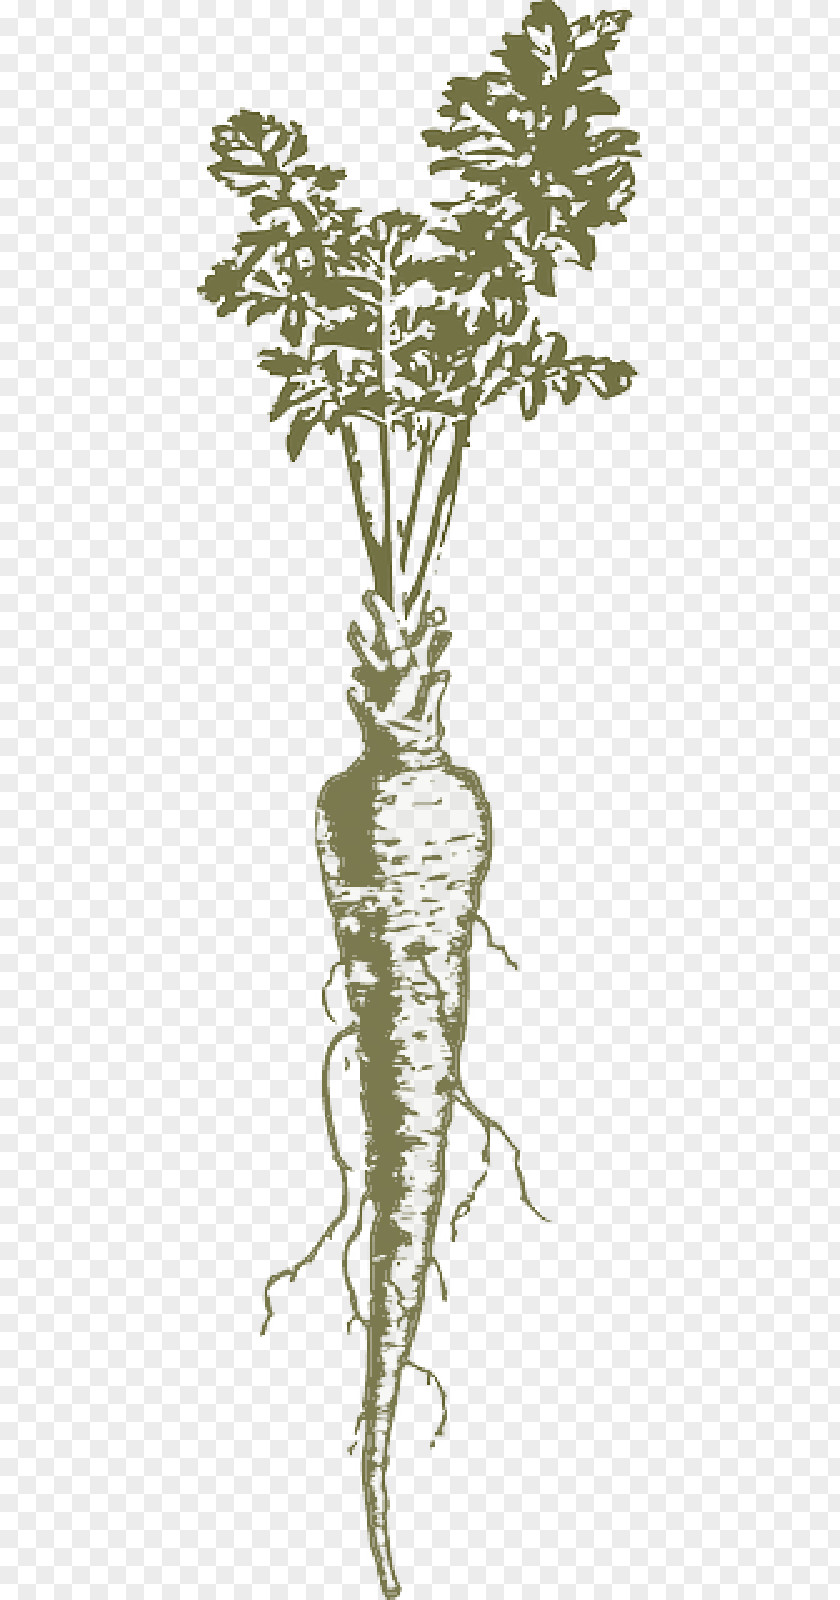 Plant Roots Parsnip Carrot Root Vegetables Clip Art PNG